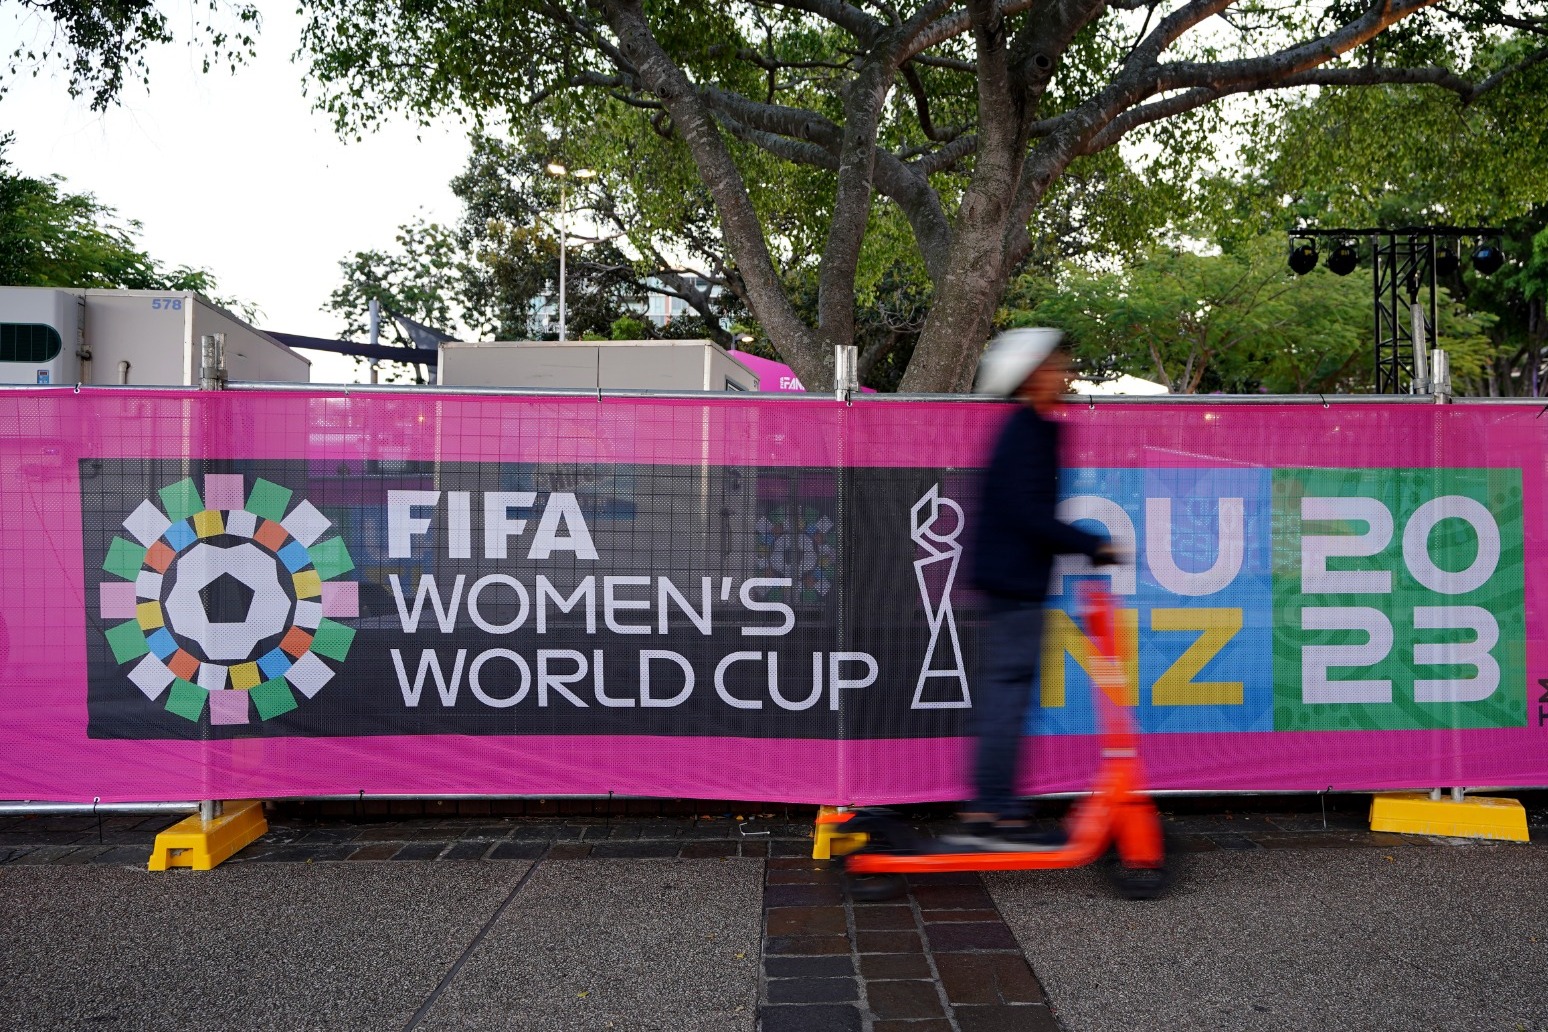 Today at the World Cup: Co-hosts Australia and New Zealand play in opening games 